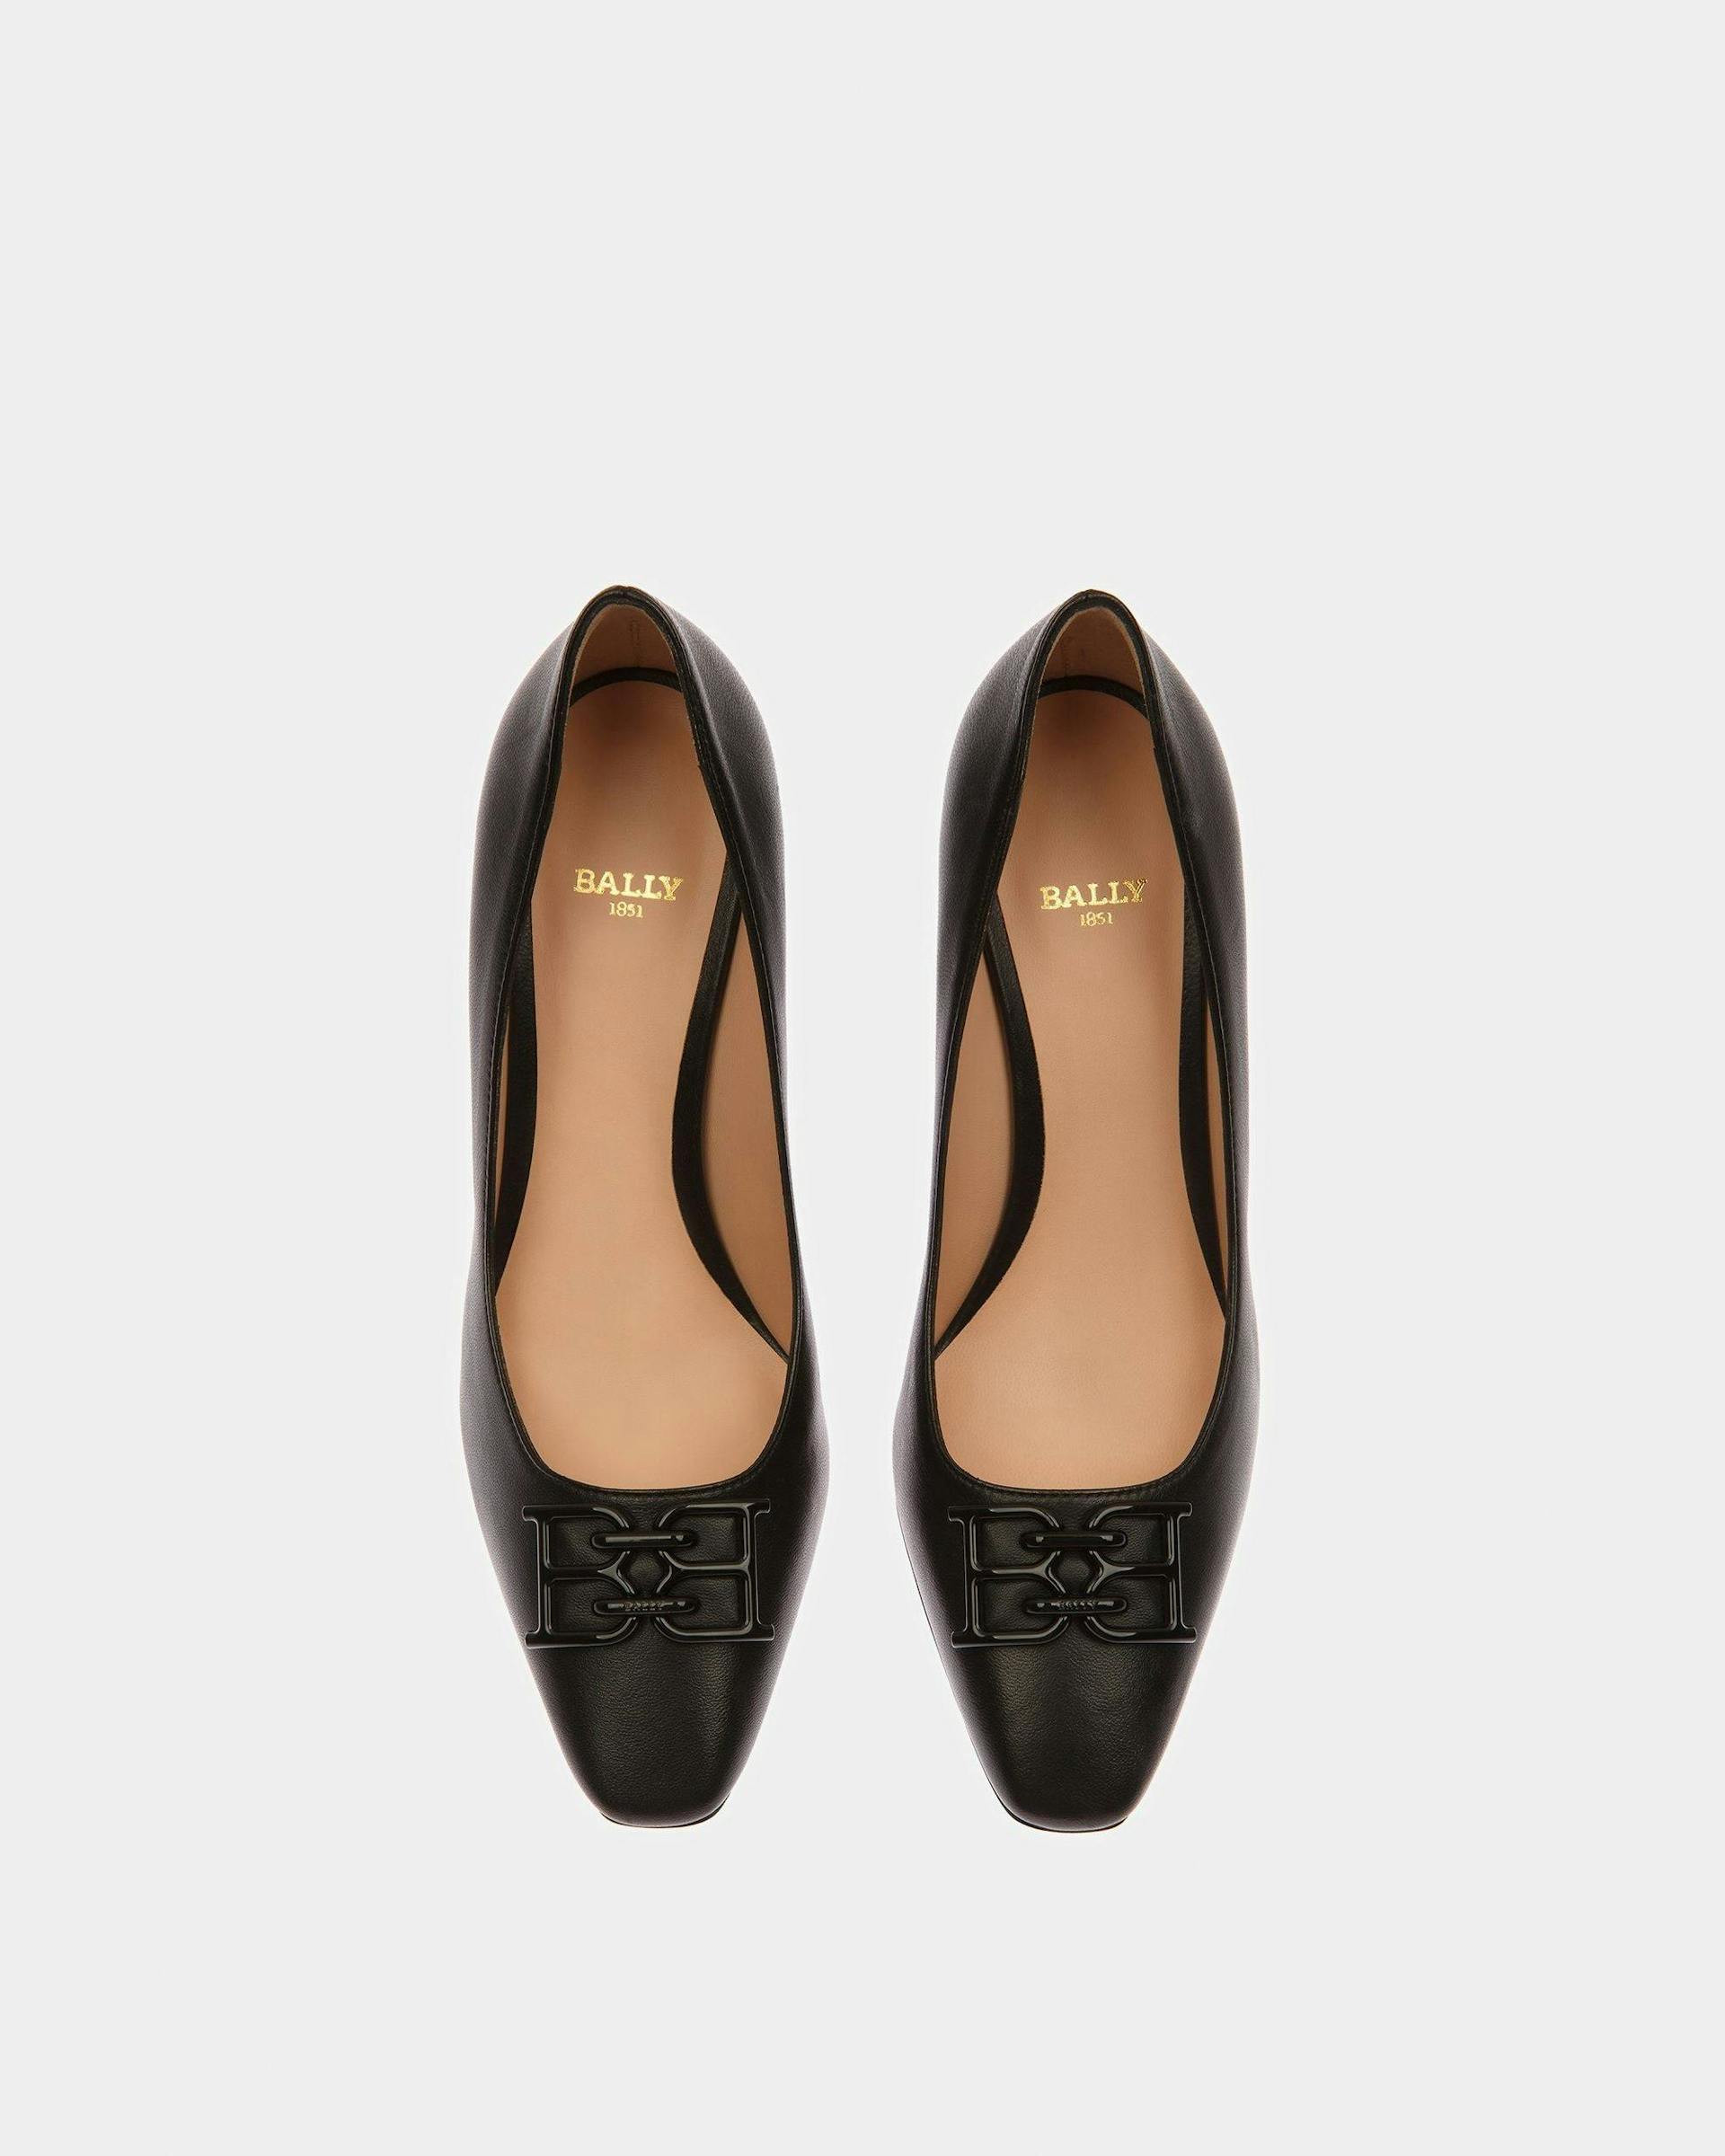 Evanca Leather Pumps In Black - Women's - Bally - 02